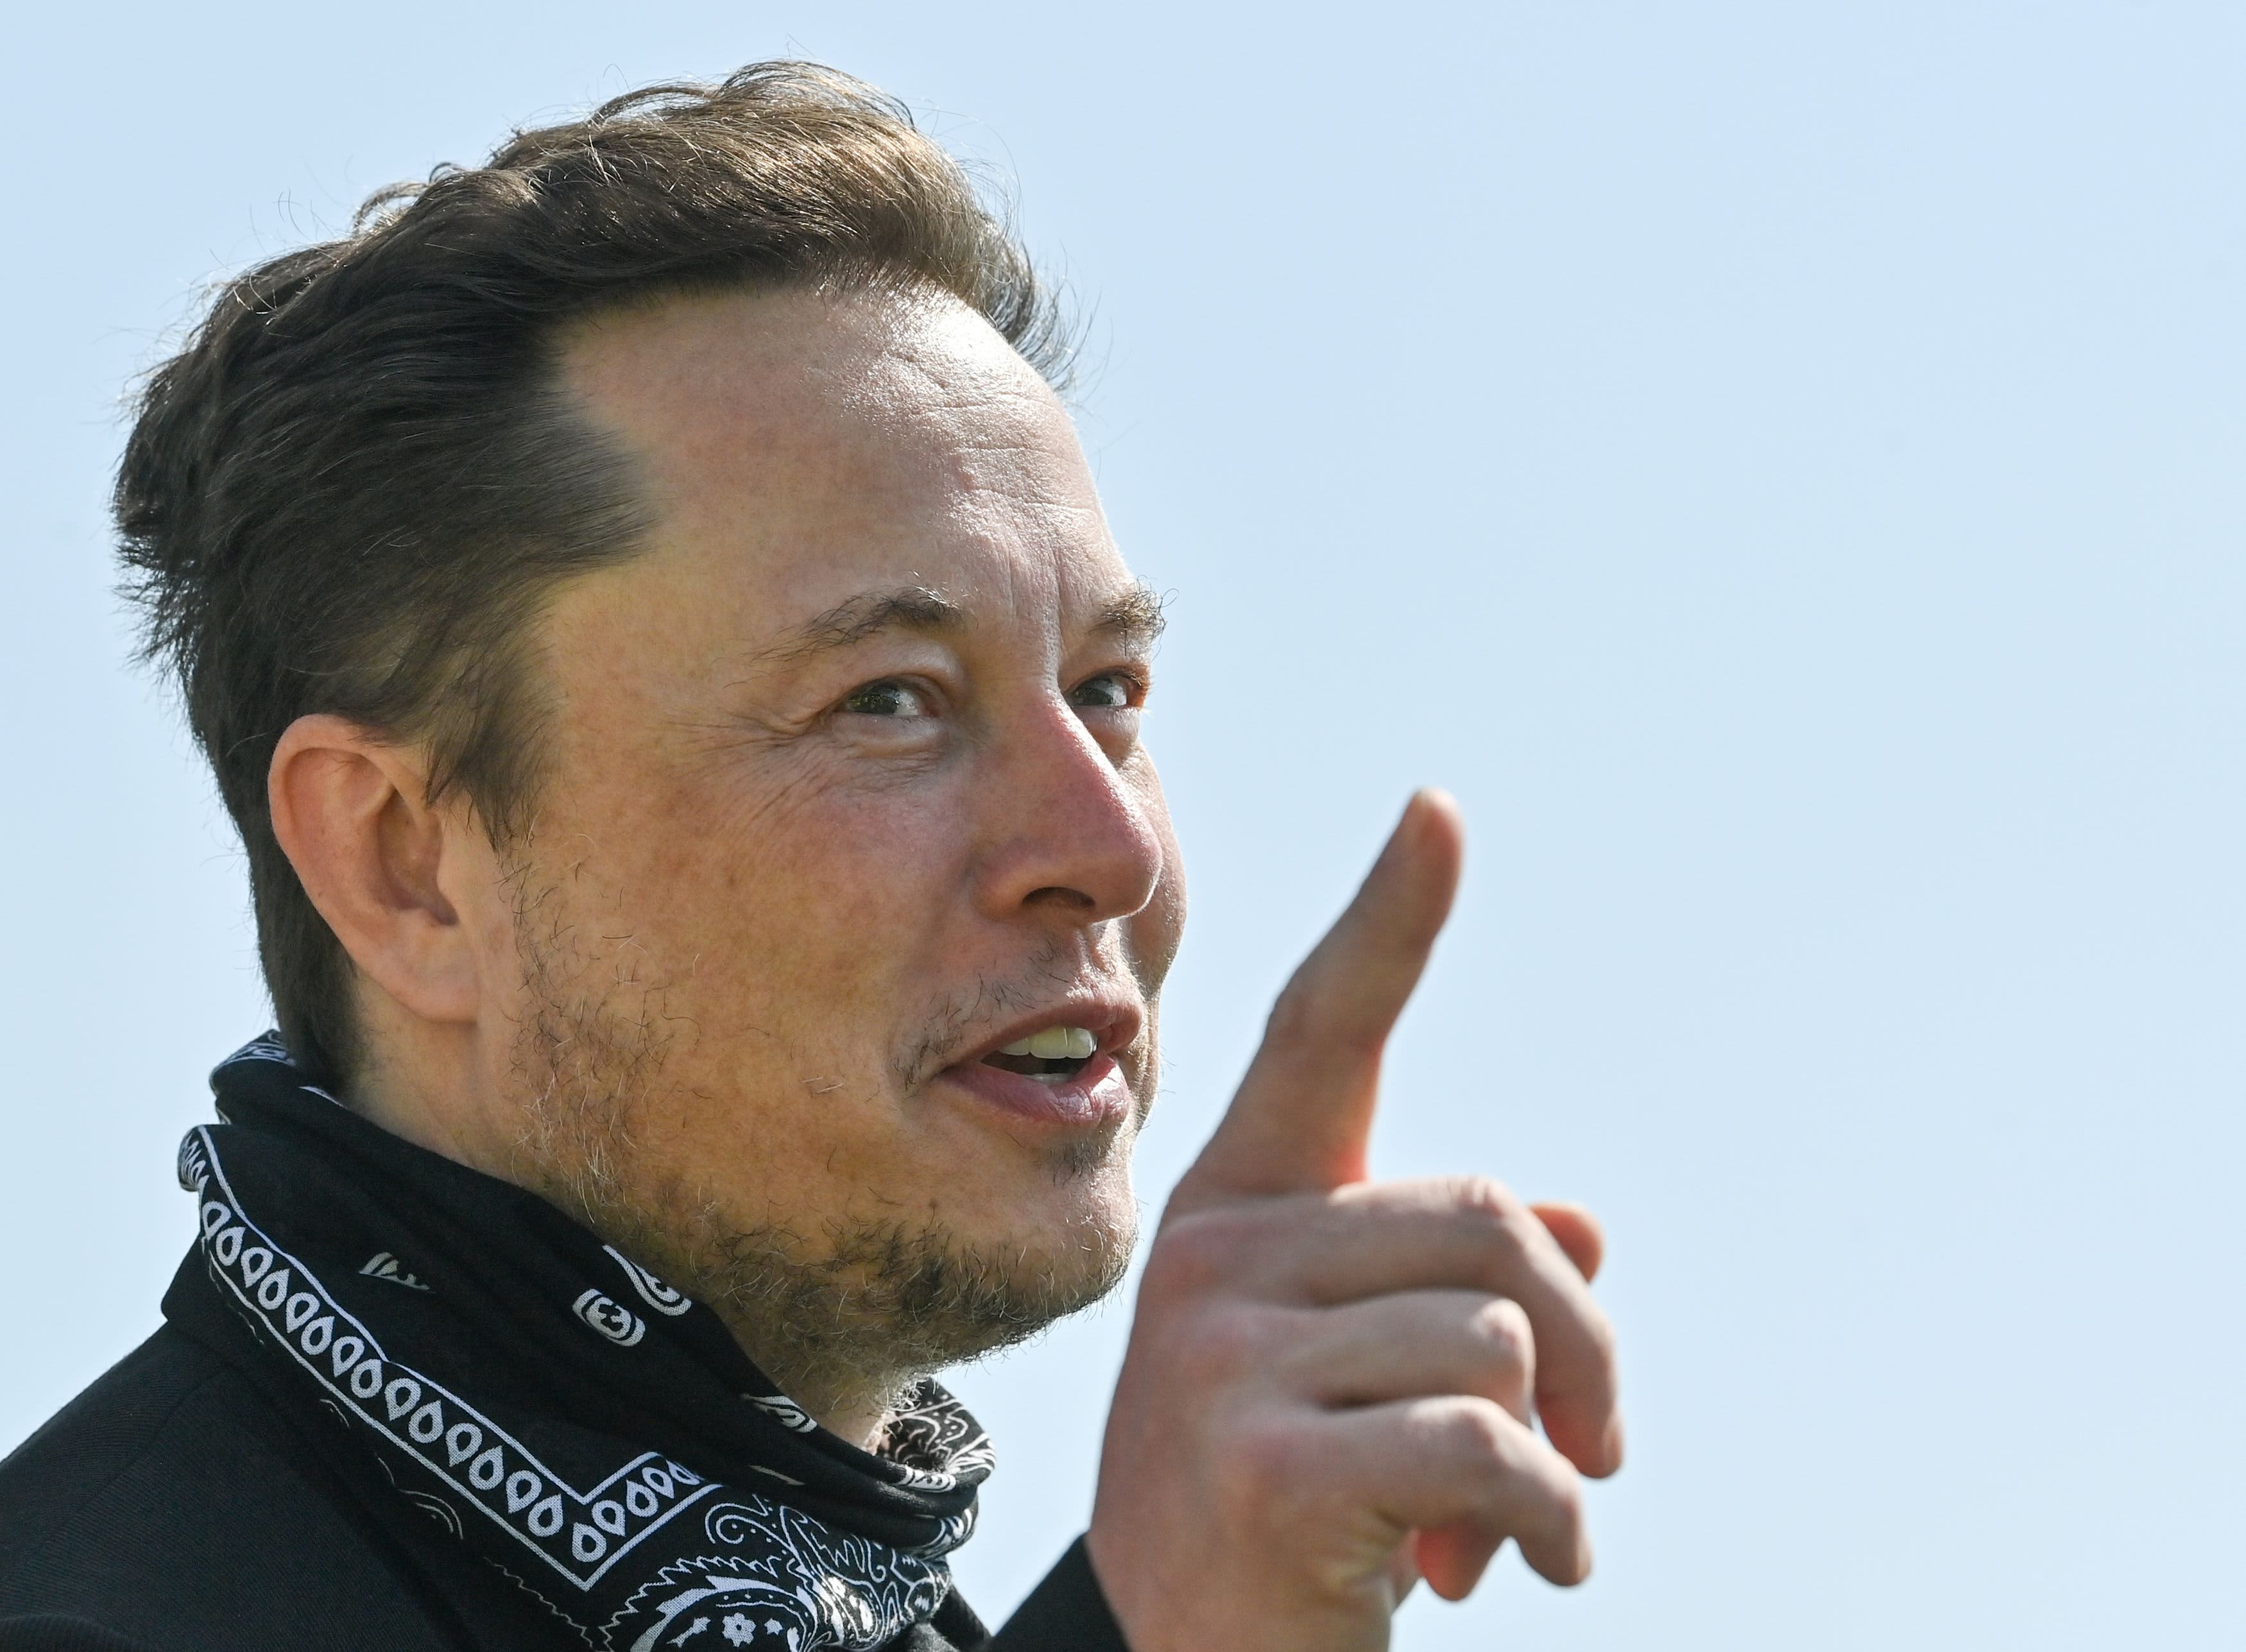 Elon Musk faces a $15 billion tax bill, which is likely the real reason he's sel..